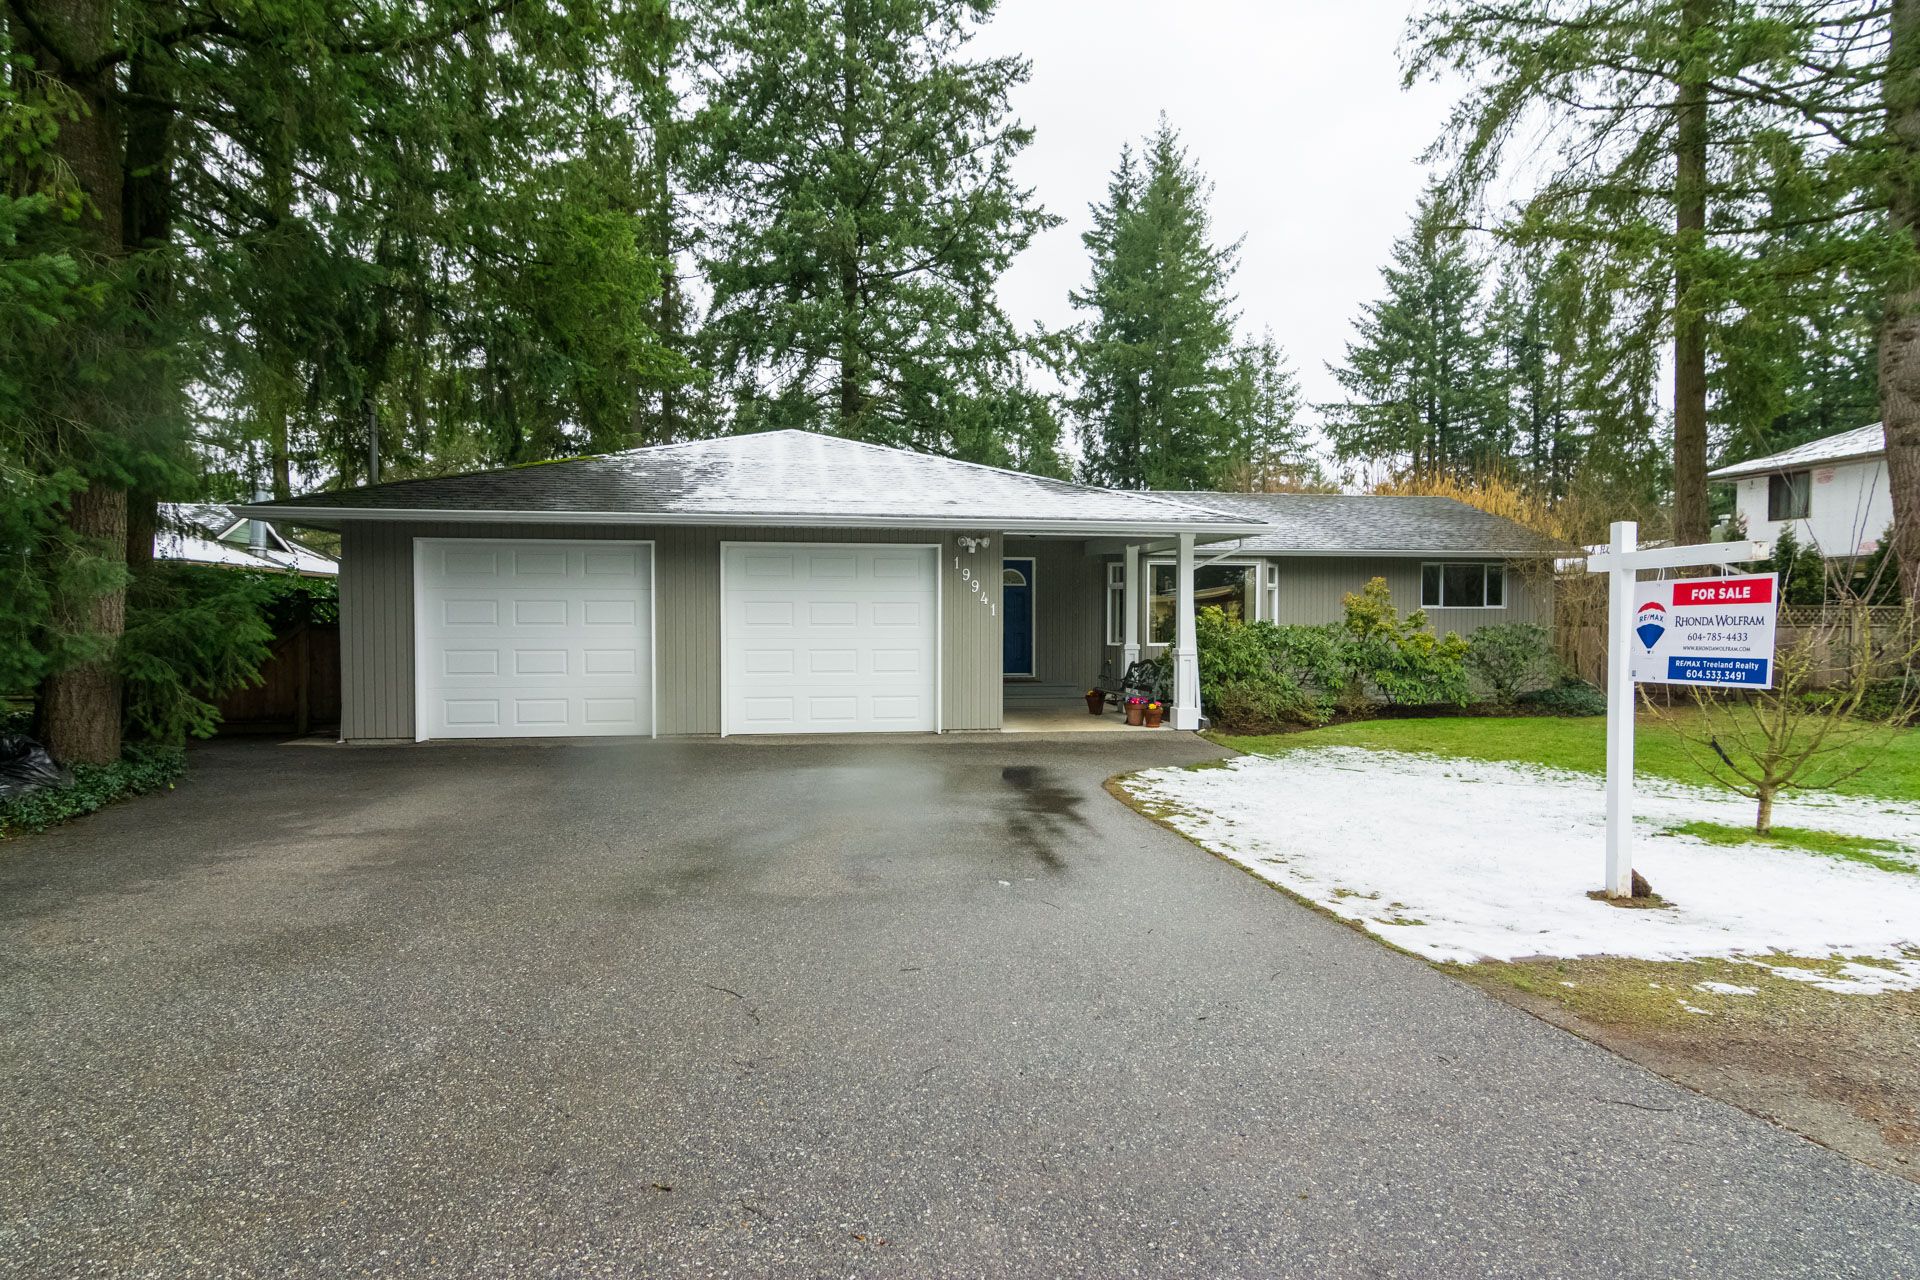 Welcome to 19941 - 37 Avenue in the sought-after Brookswood area of Langley, BC where you still can own a home on a large lot!